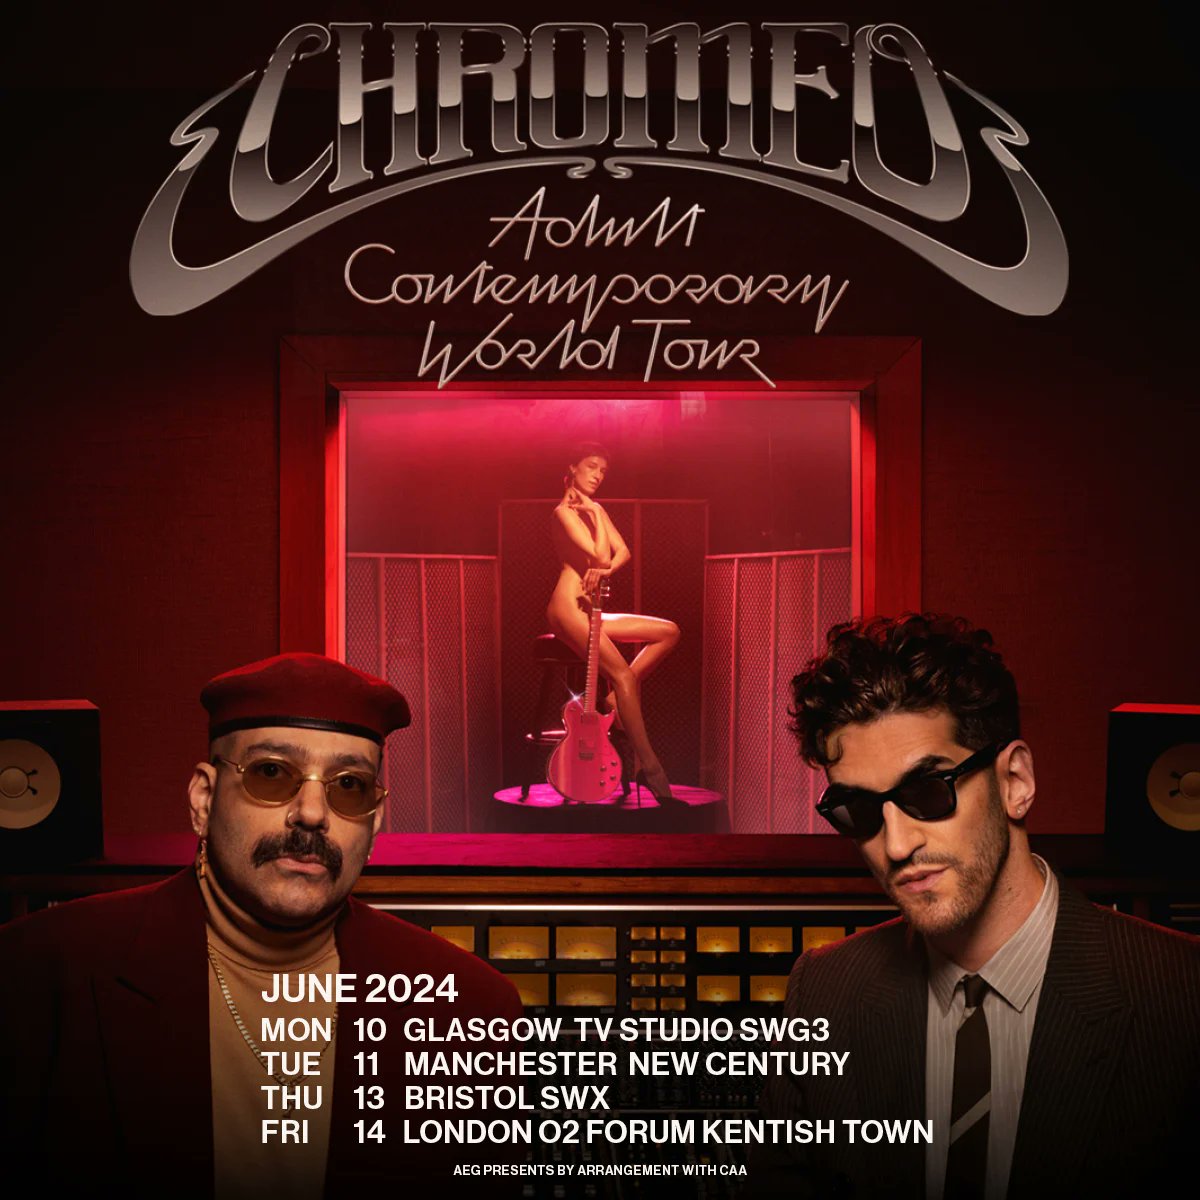 Chromeo - Adult Contemporary World Tour at Manchester New Century Hall Tickets